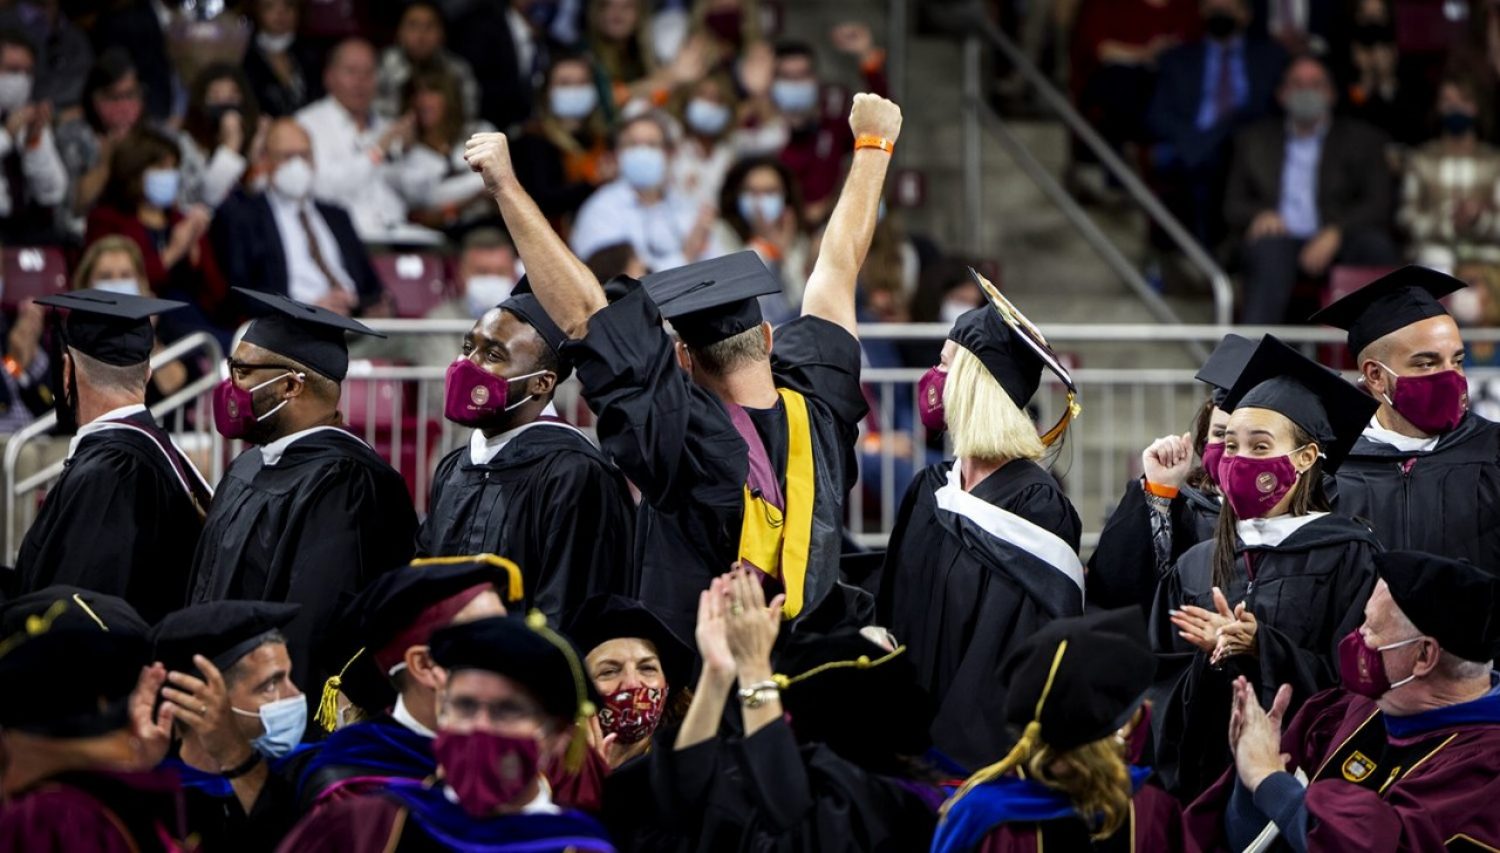 A student raising their hands in the air during a Commencement ceremony